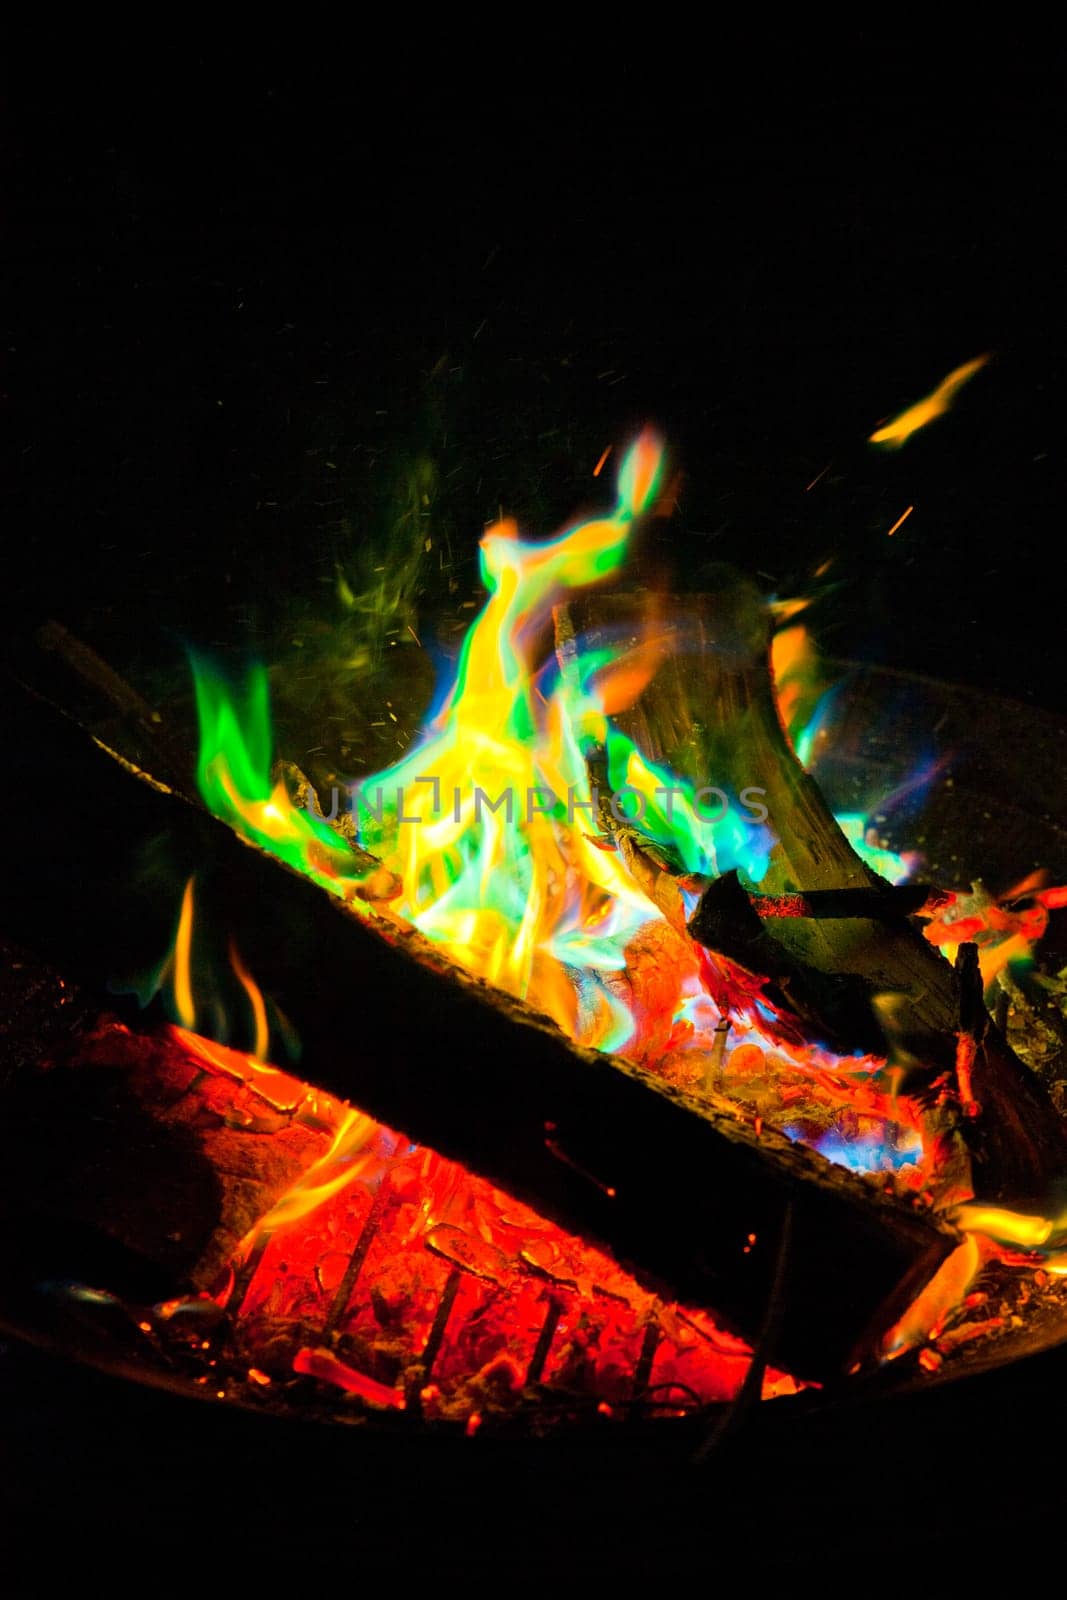 Vibrant Campfire Flames Dancing in Indiana Night by njproductions